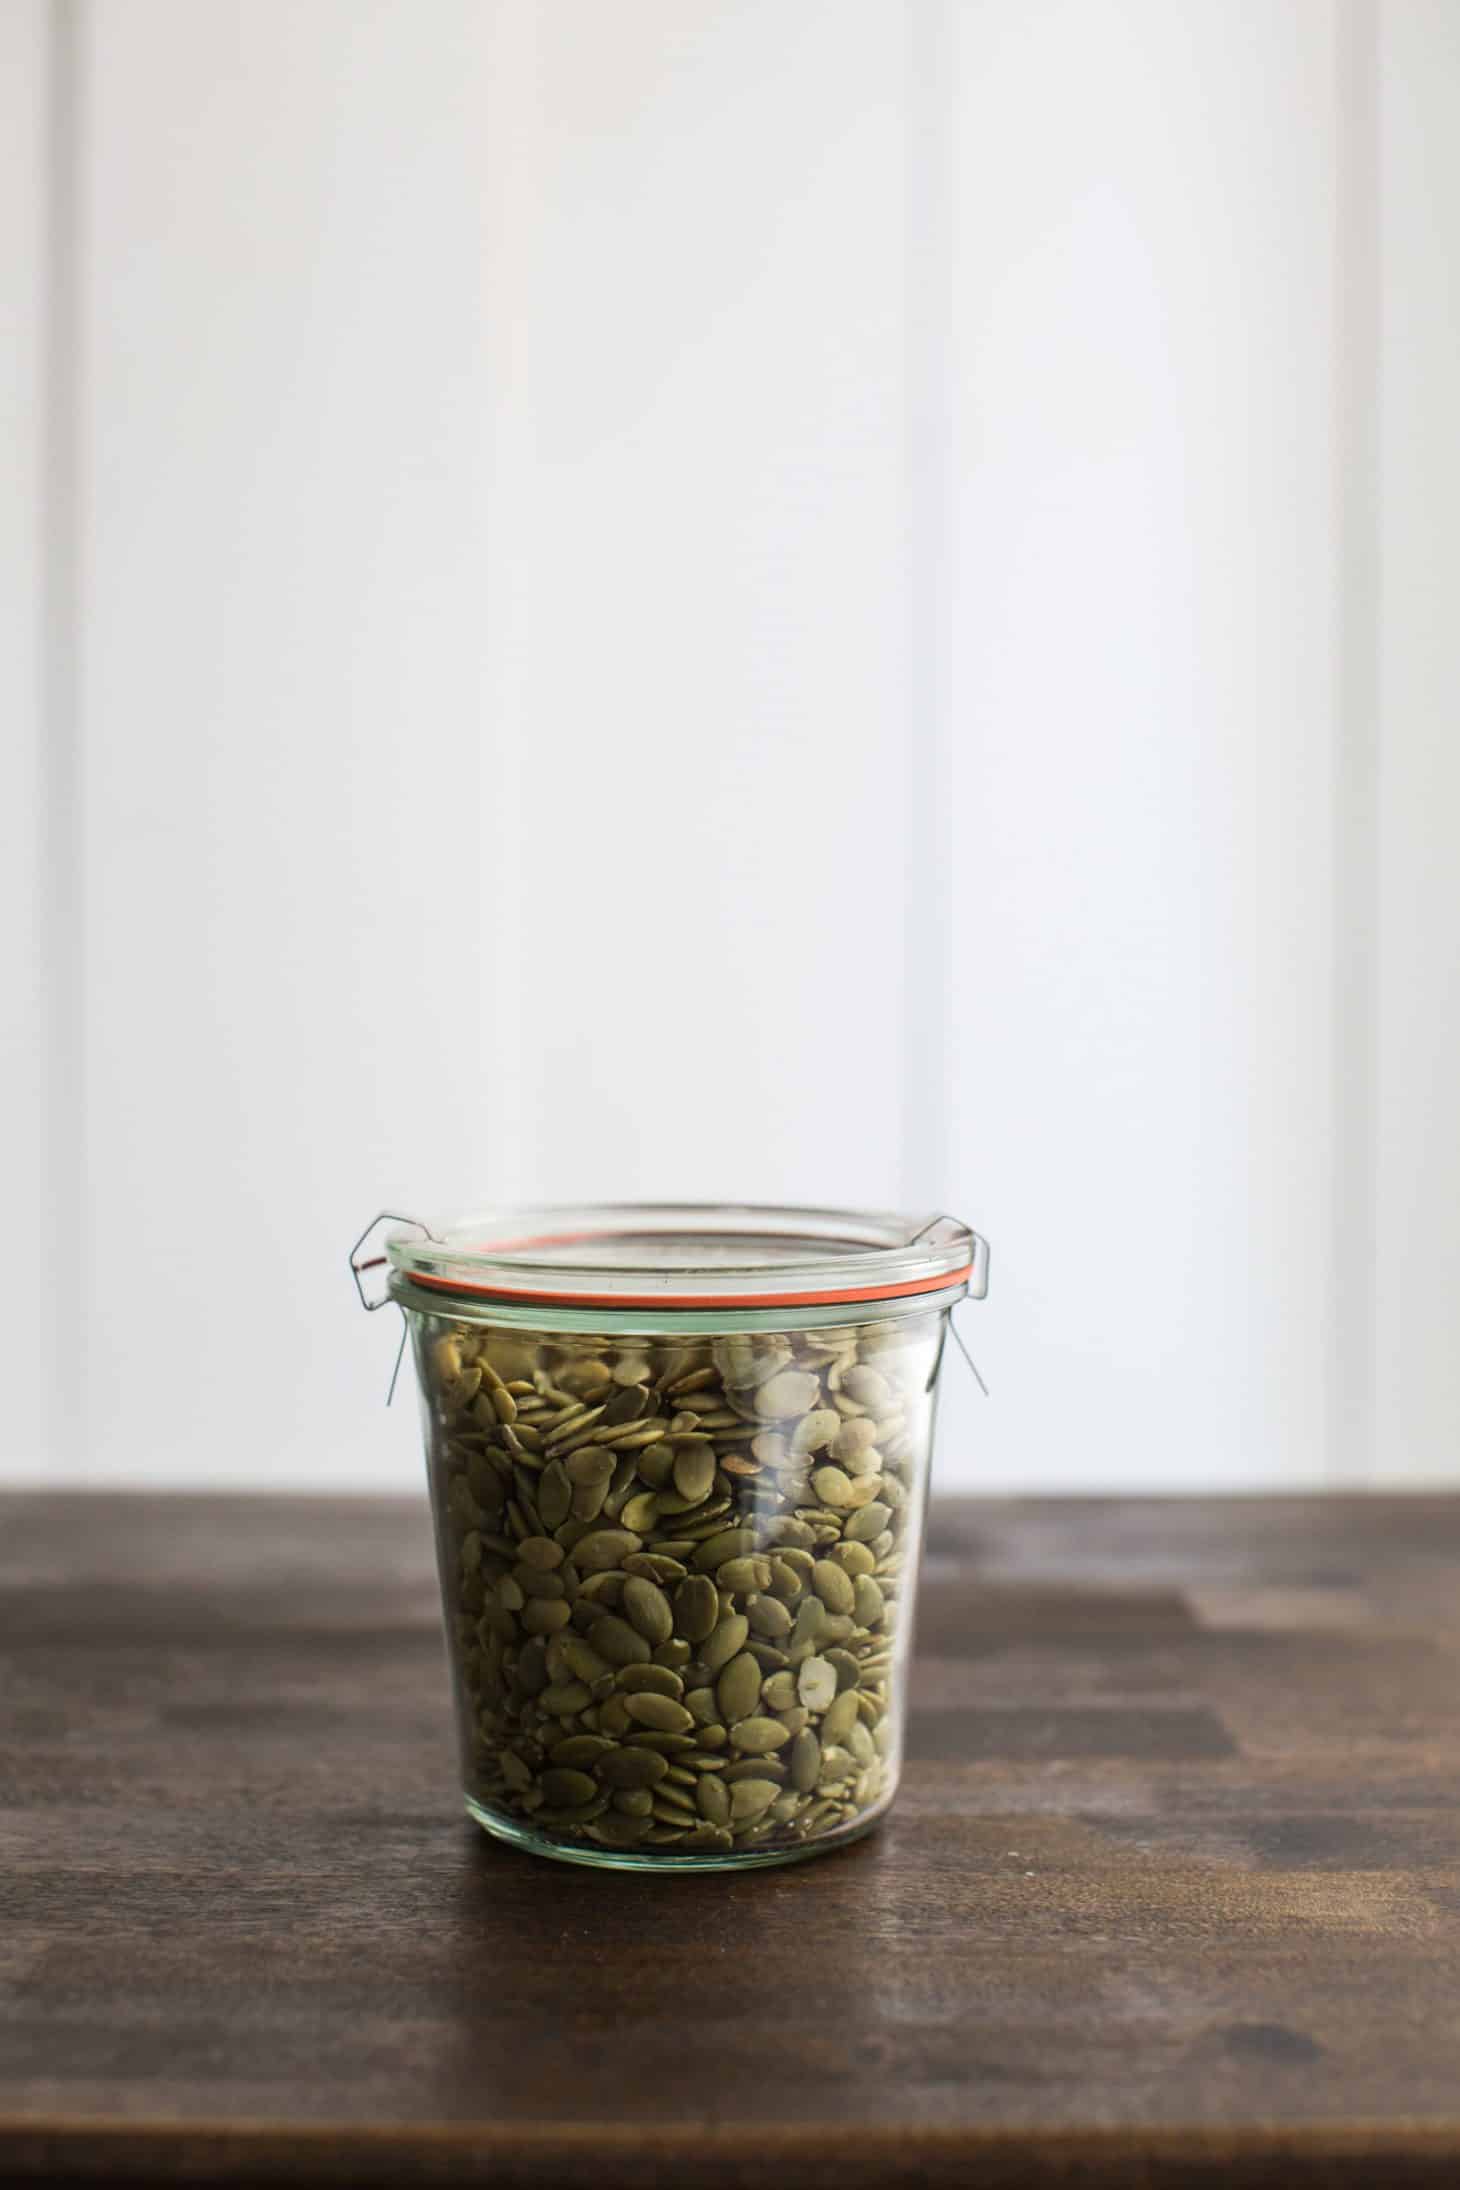 Pumpkin Seeds - Nuts and Seeds - Stock a Pantry